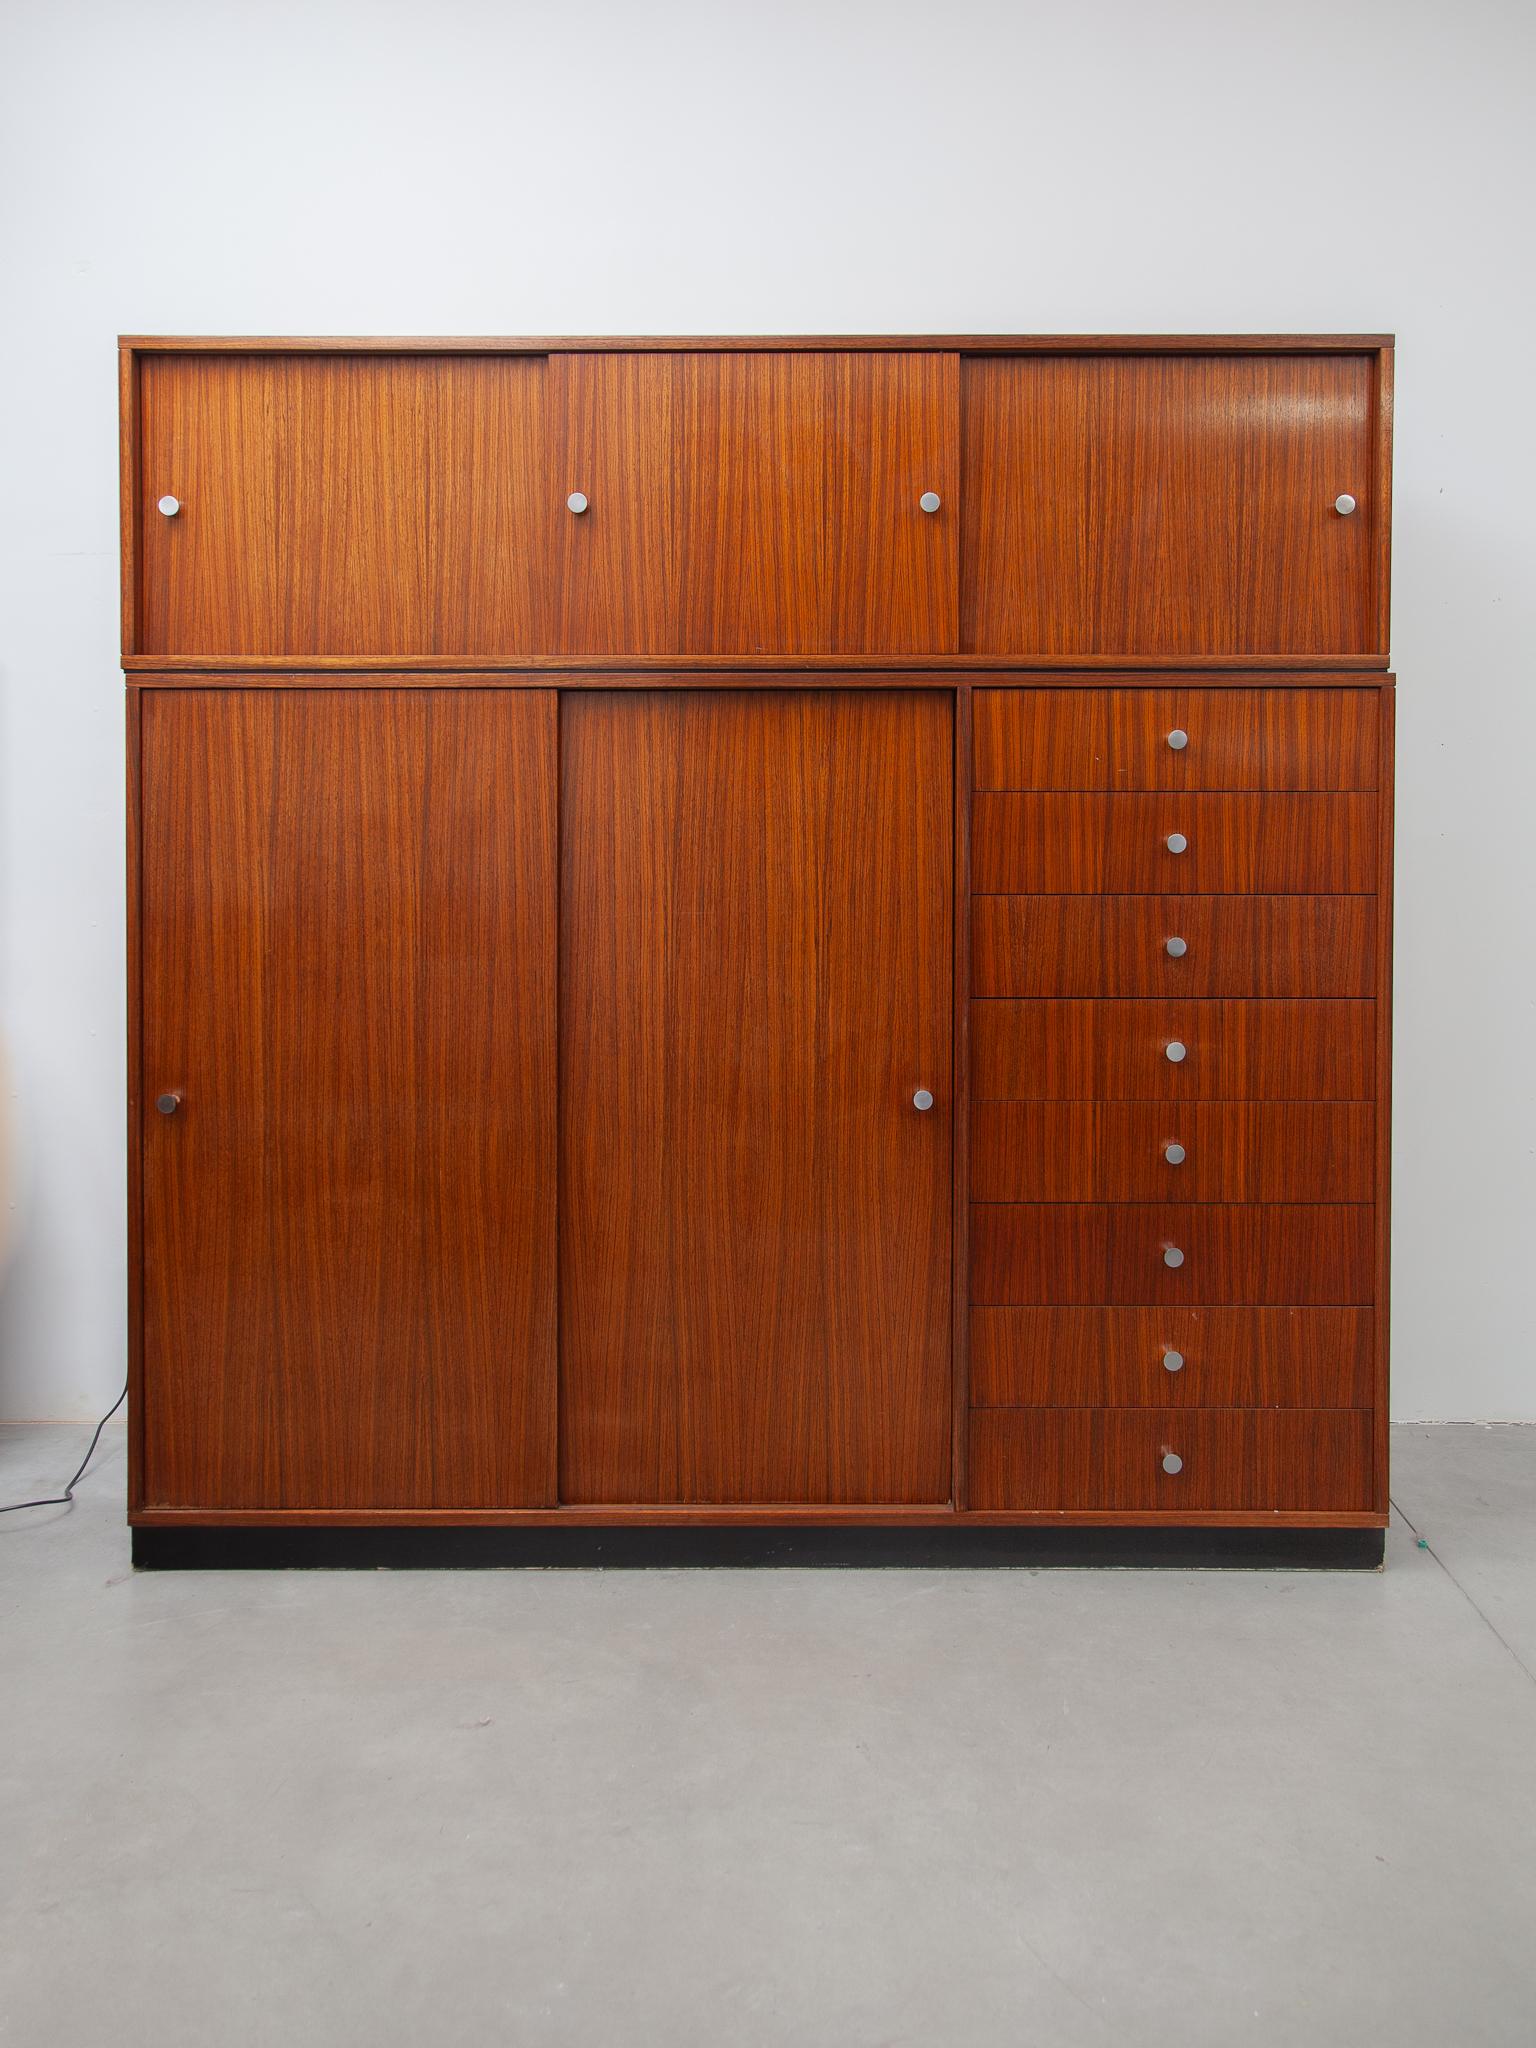 Beautiful wall unit wardrobe, cabinet designed in pure lines by Alfred Hendricks for Belform. A rare version of the design that is practical to use for a wardrobe. Beside the eight large drawers the furniture is featured into a side for hanging